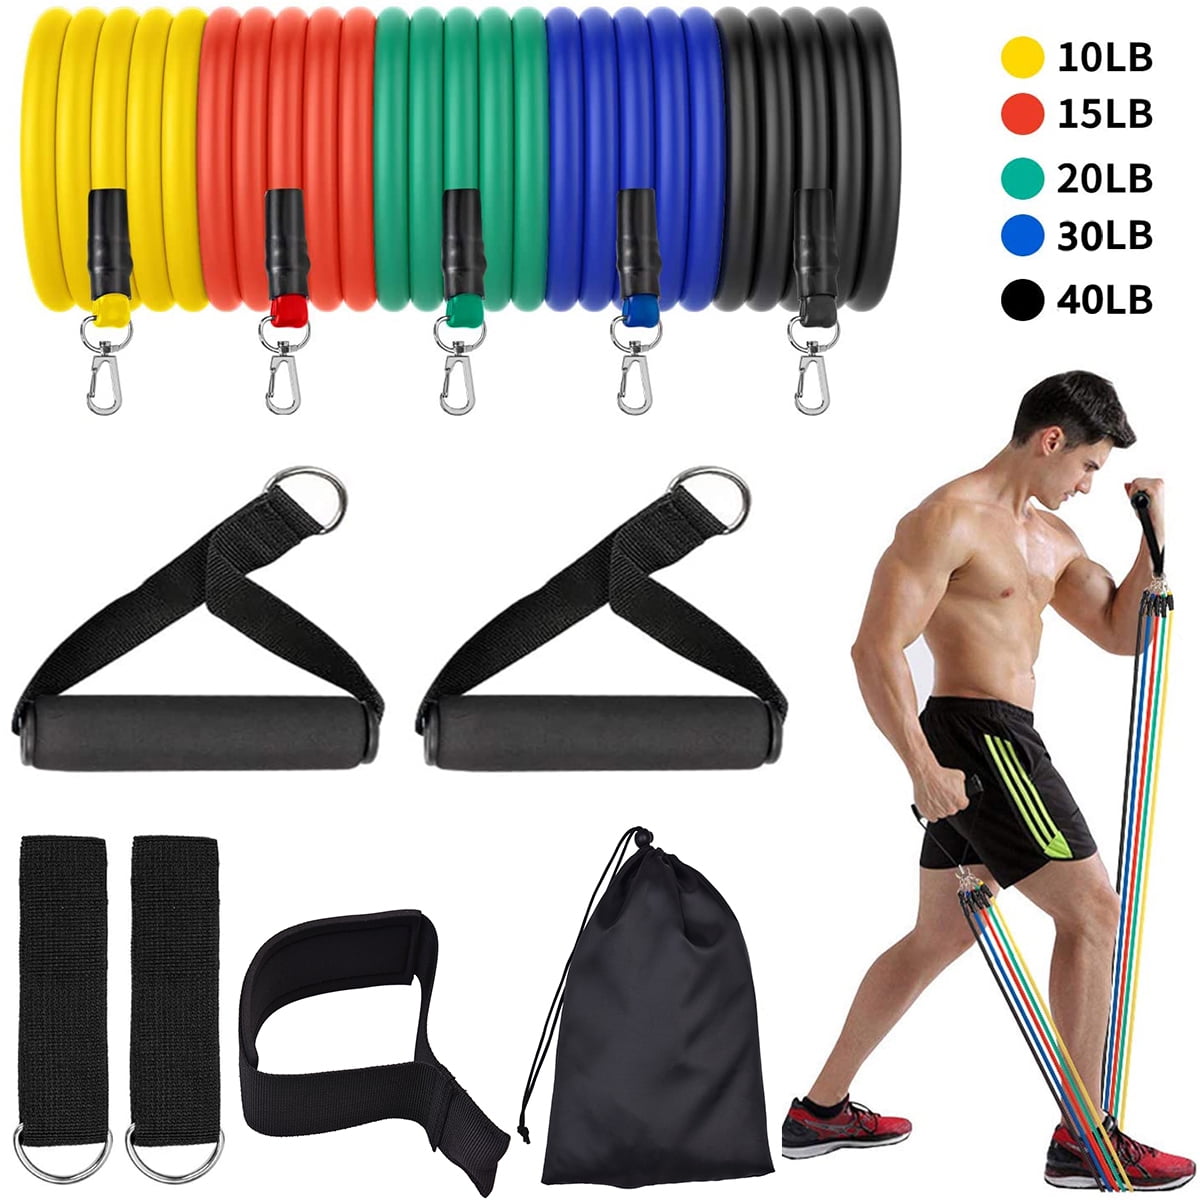 Resistance Bands Set 11 pcs Exercise Bands Stackable up to 100 lbs with Handles Door Anchors Ankle Straps Instruction for Indoor Outdoor Strength Training Weight Lifting